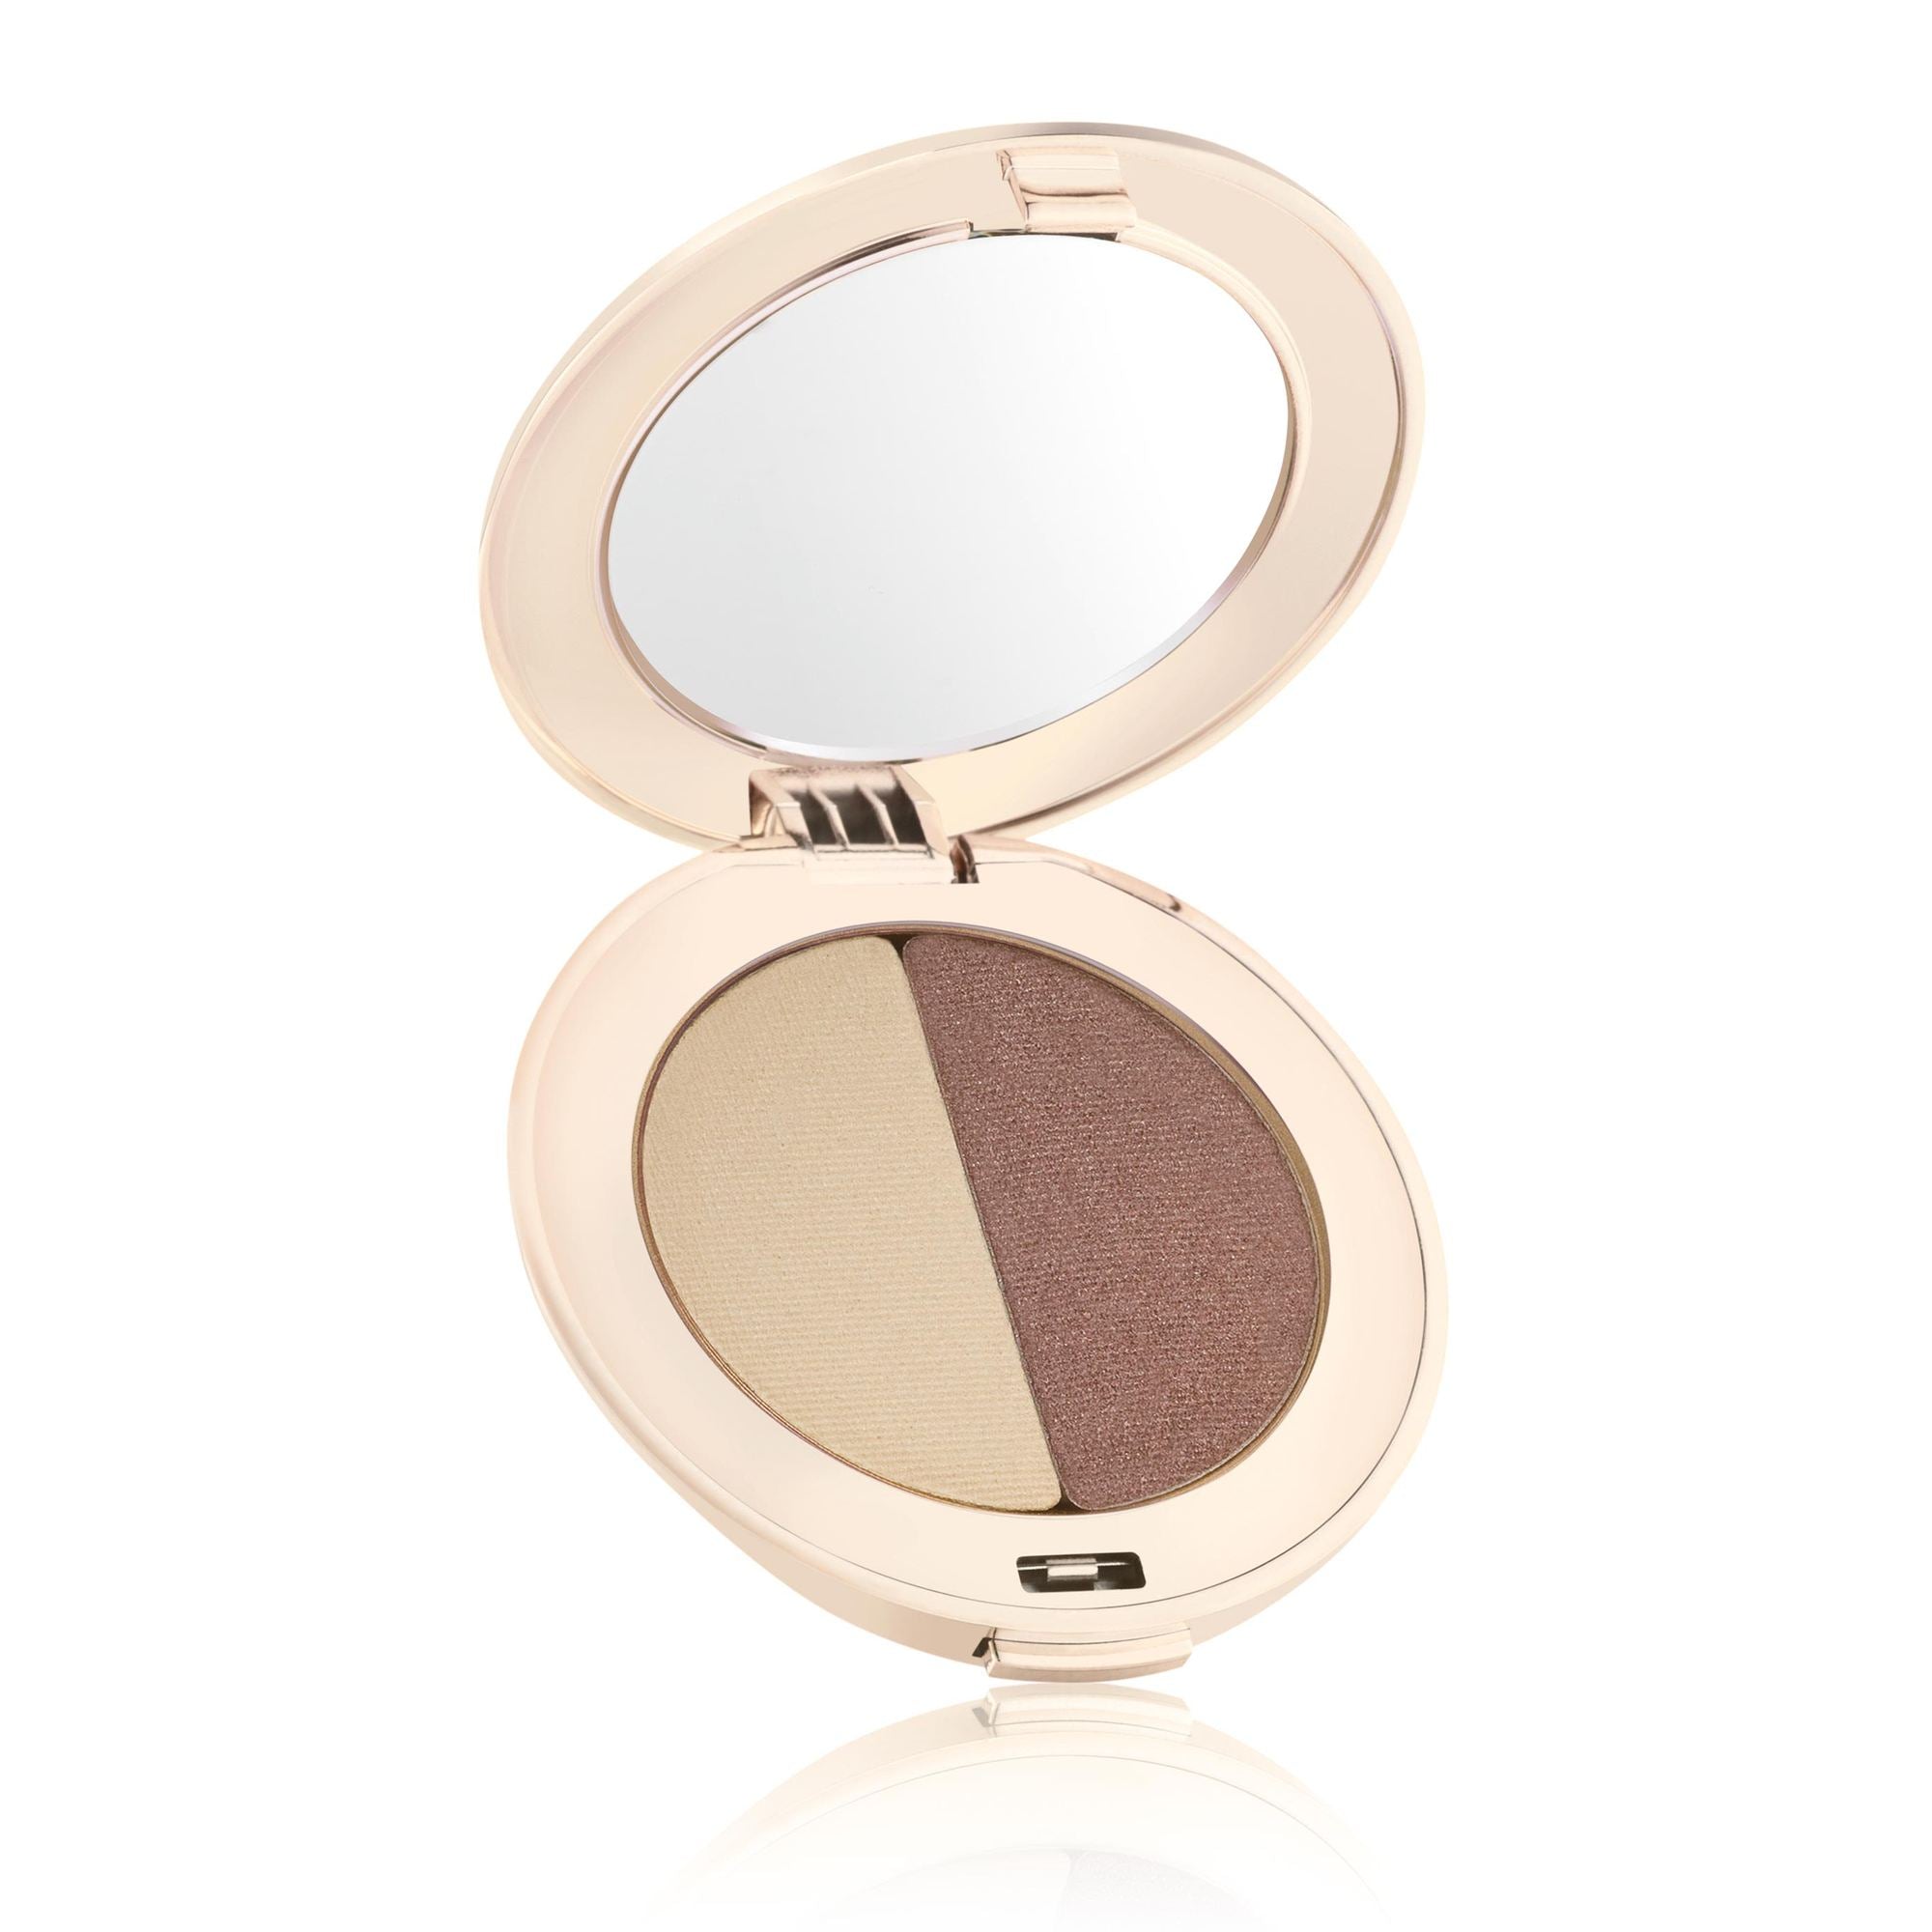 JANE IREDALE PURE PRESSED EYE SHADOW DUO